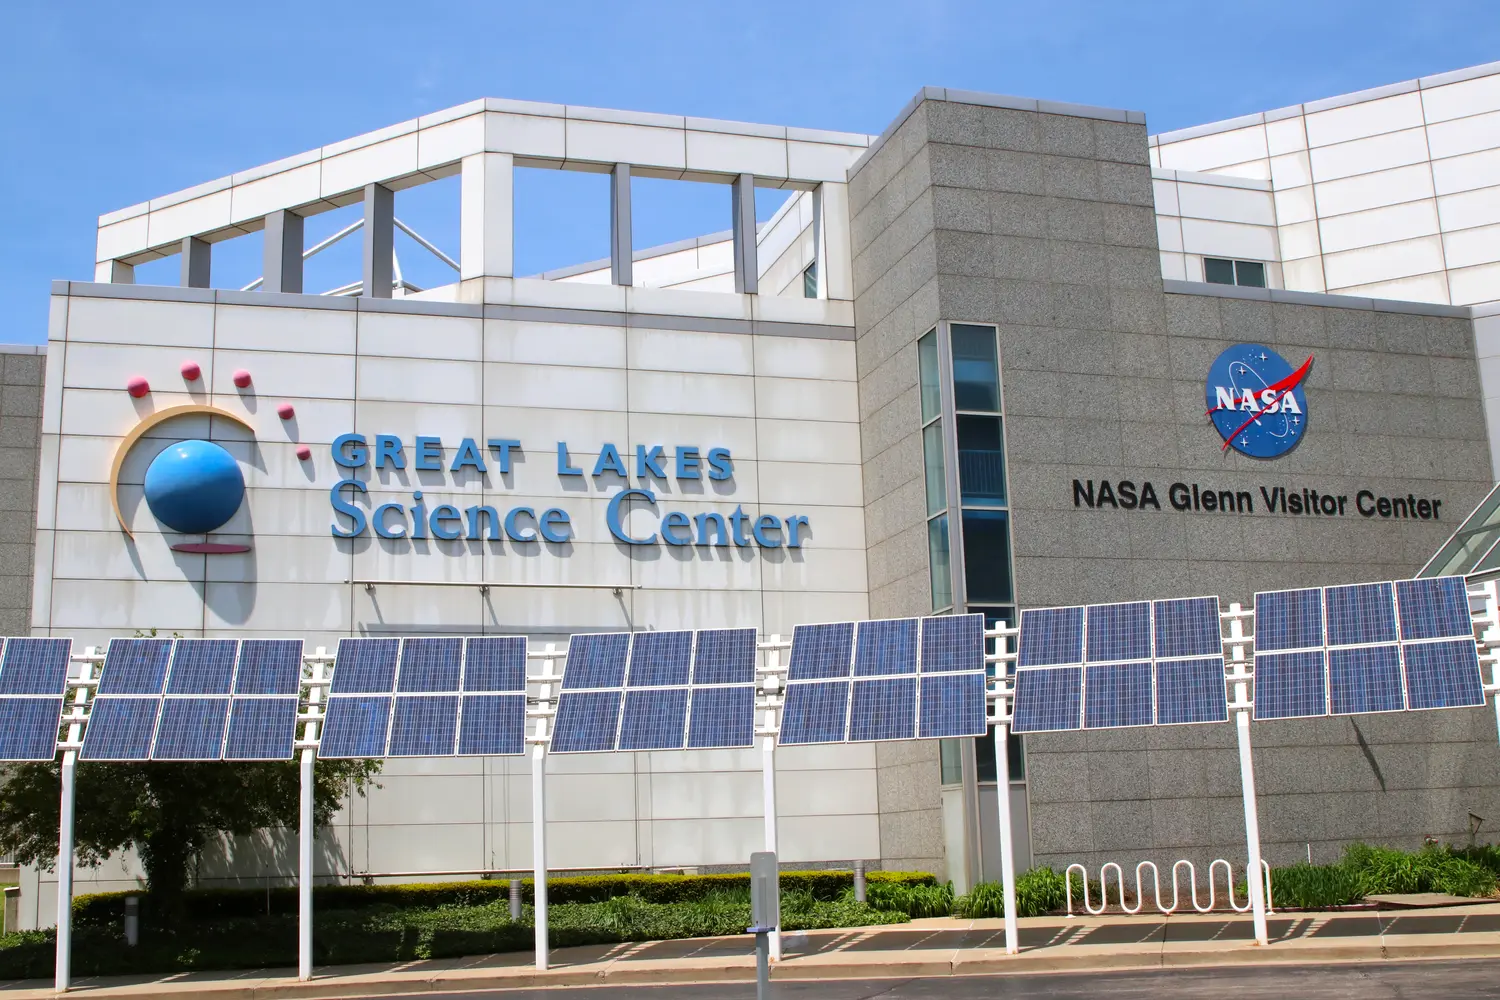 Great Lakes Science Center in Cleveland, Ohio